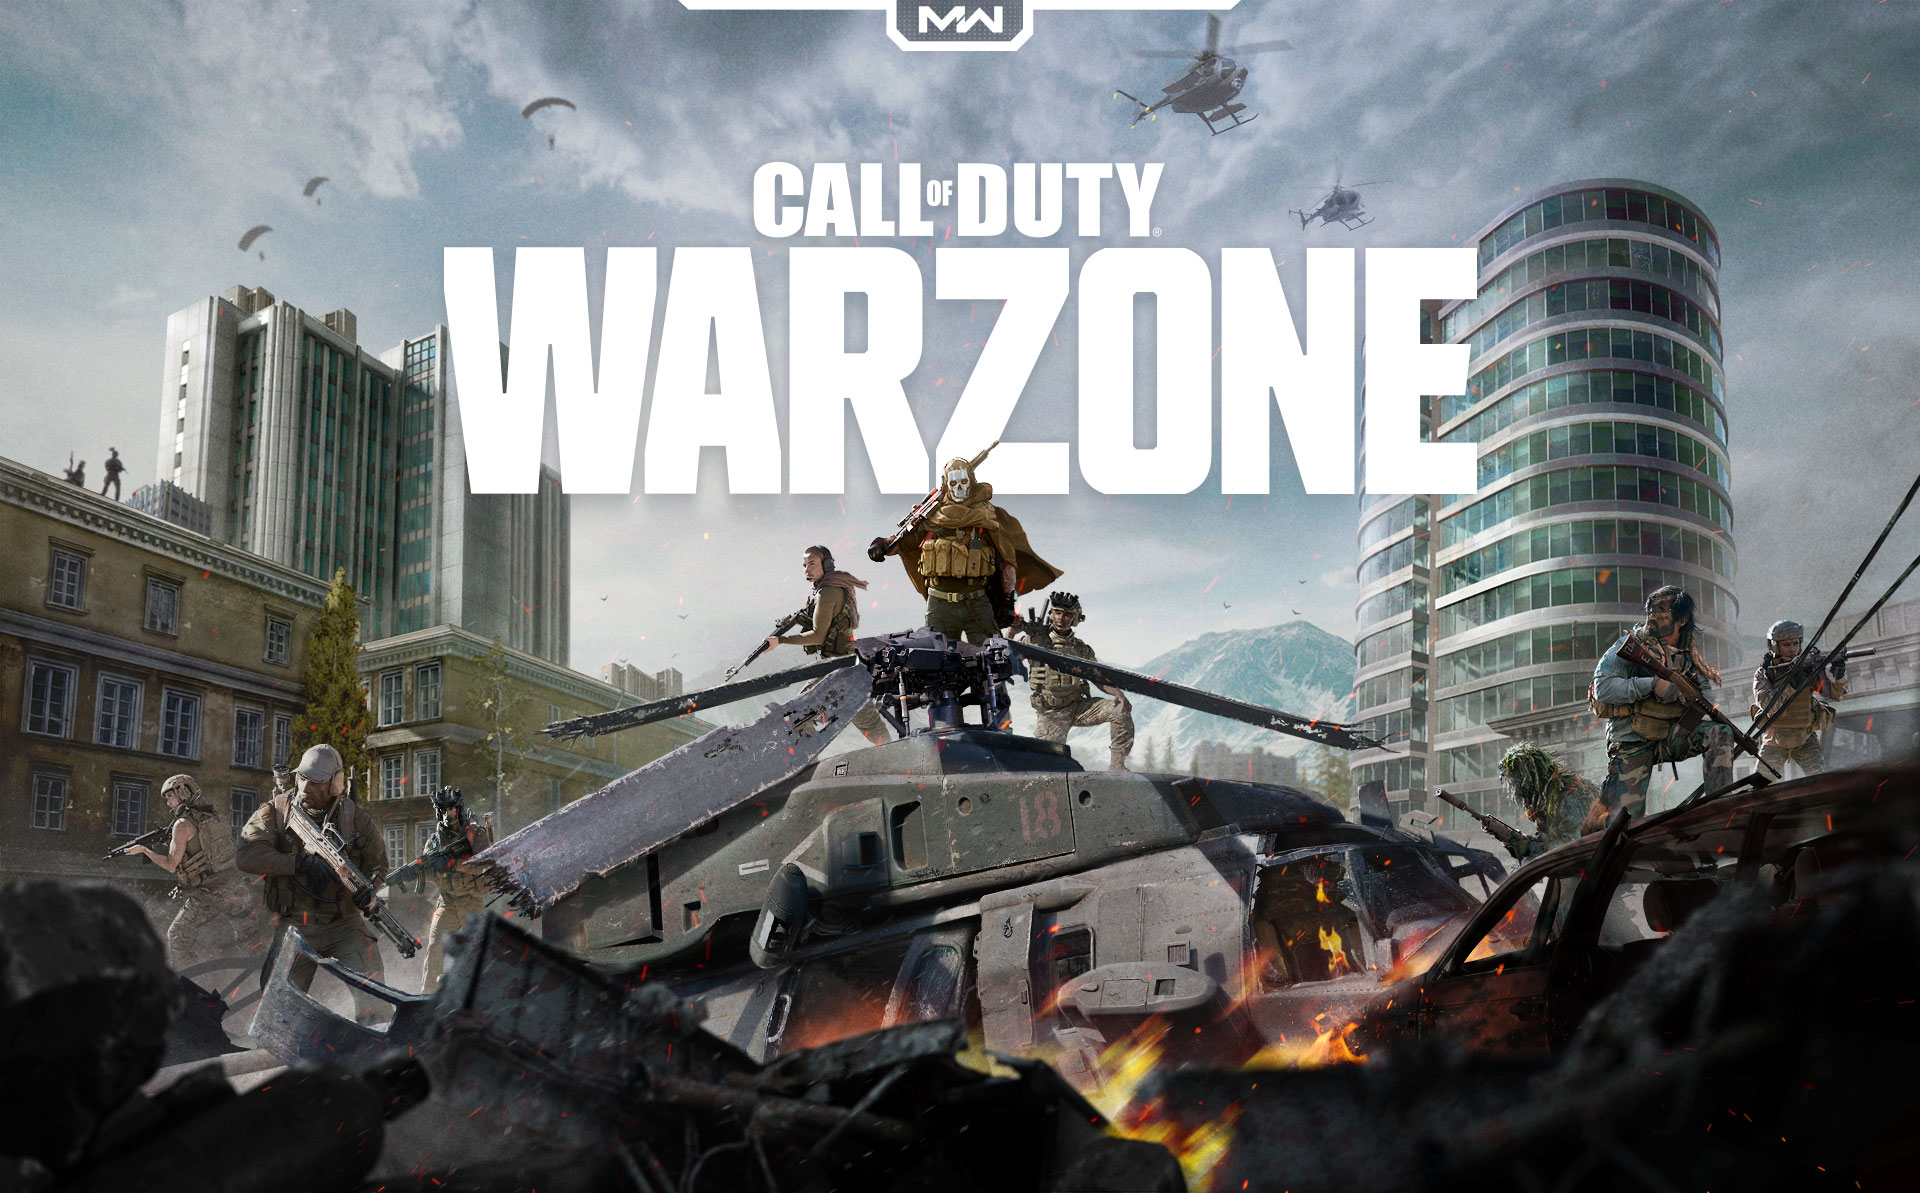 The new season in Call of Duty: Warzone has been postponed - the official reason: due to community complaints